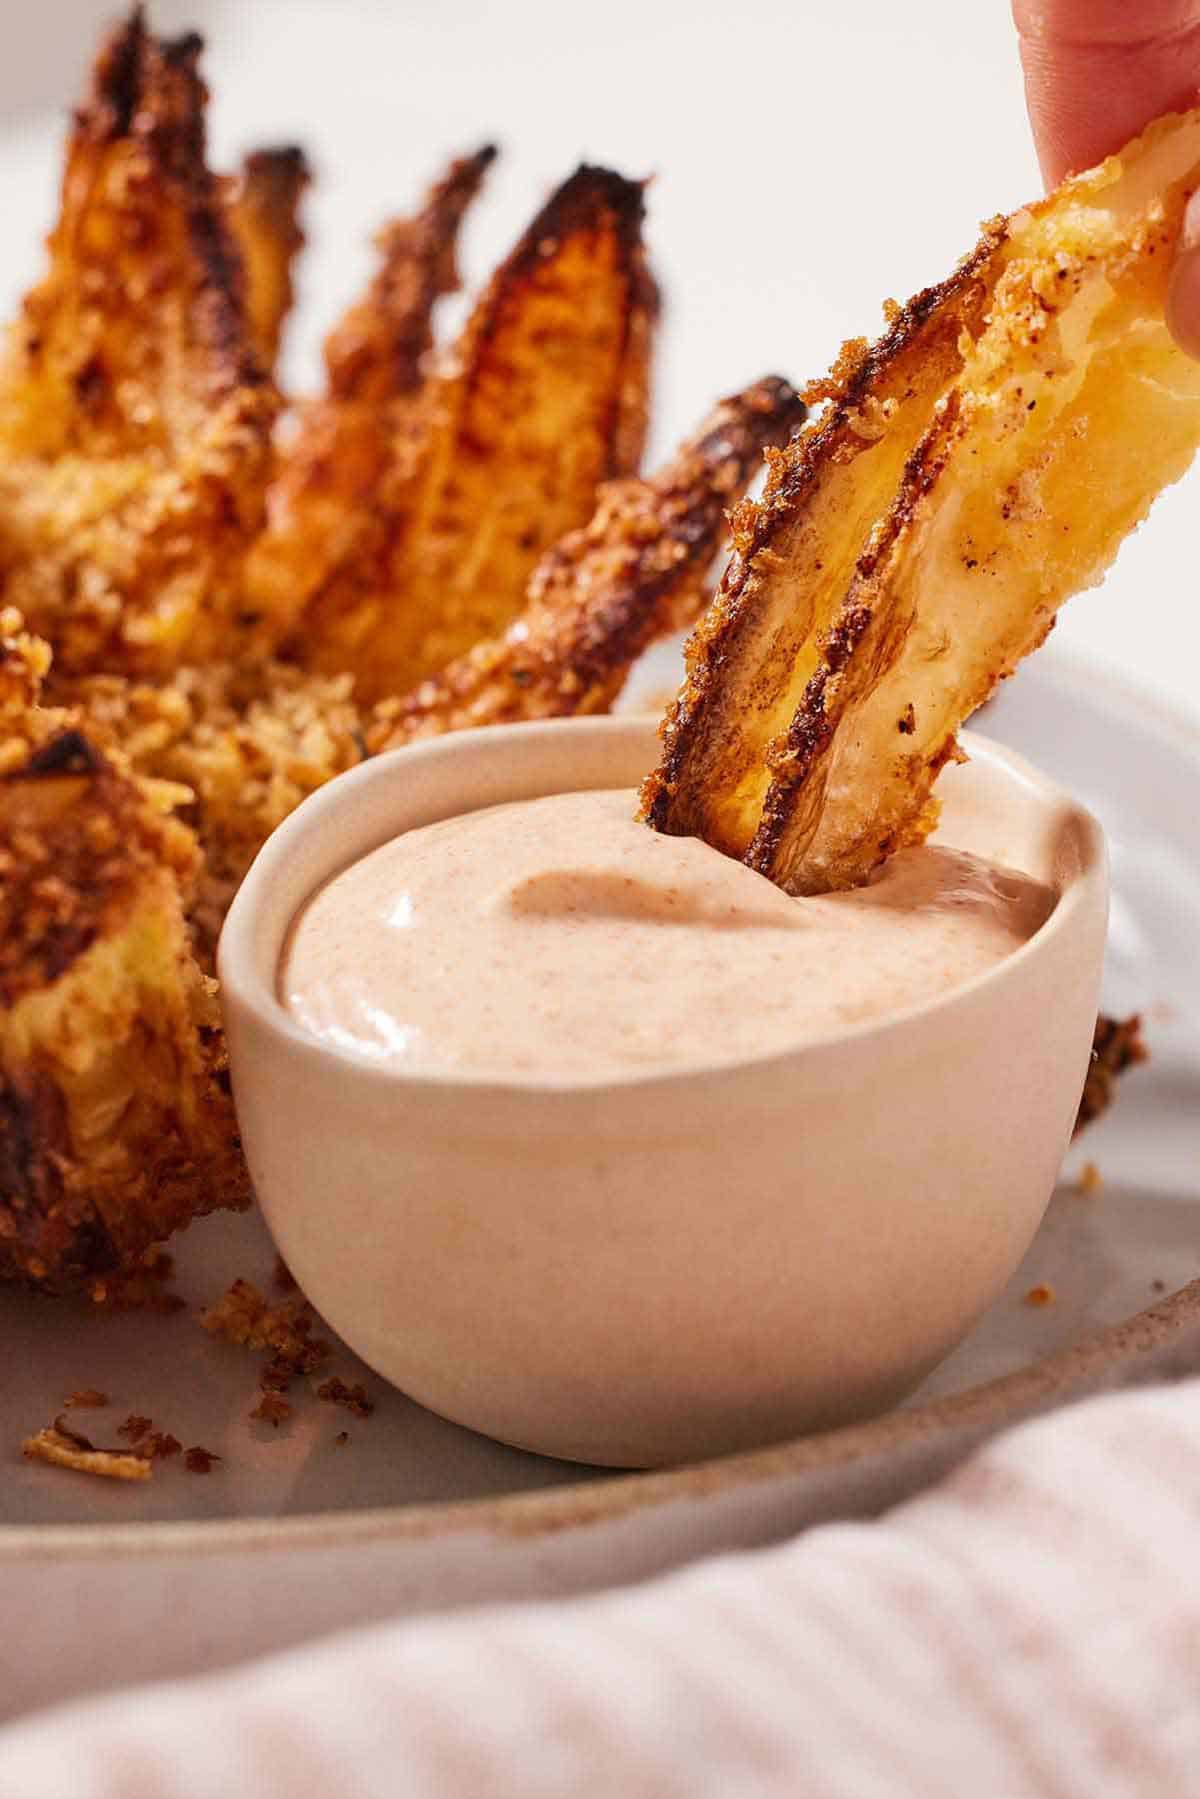 A piece of air fryer blooming onion dipped into a small bowl of sauce.